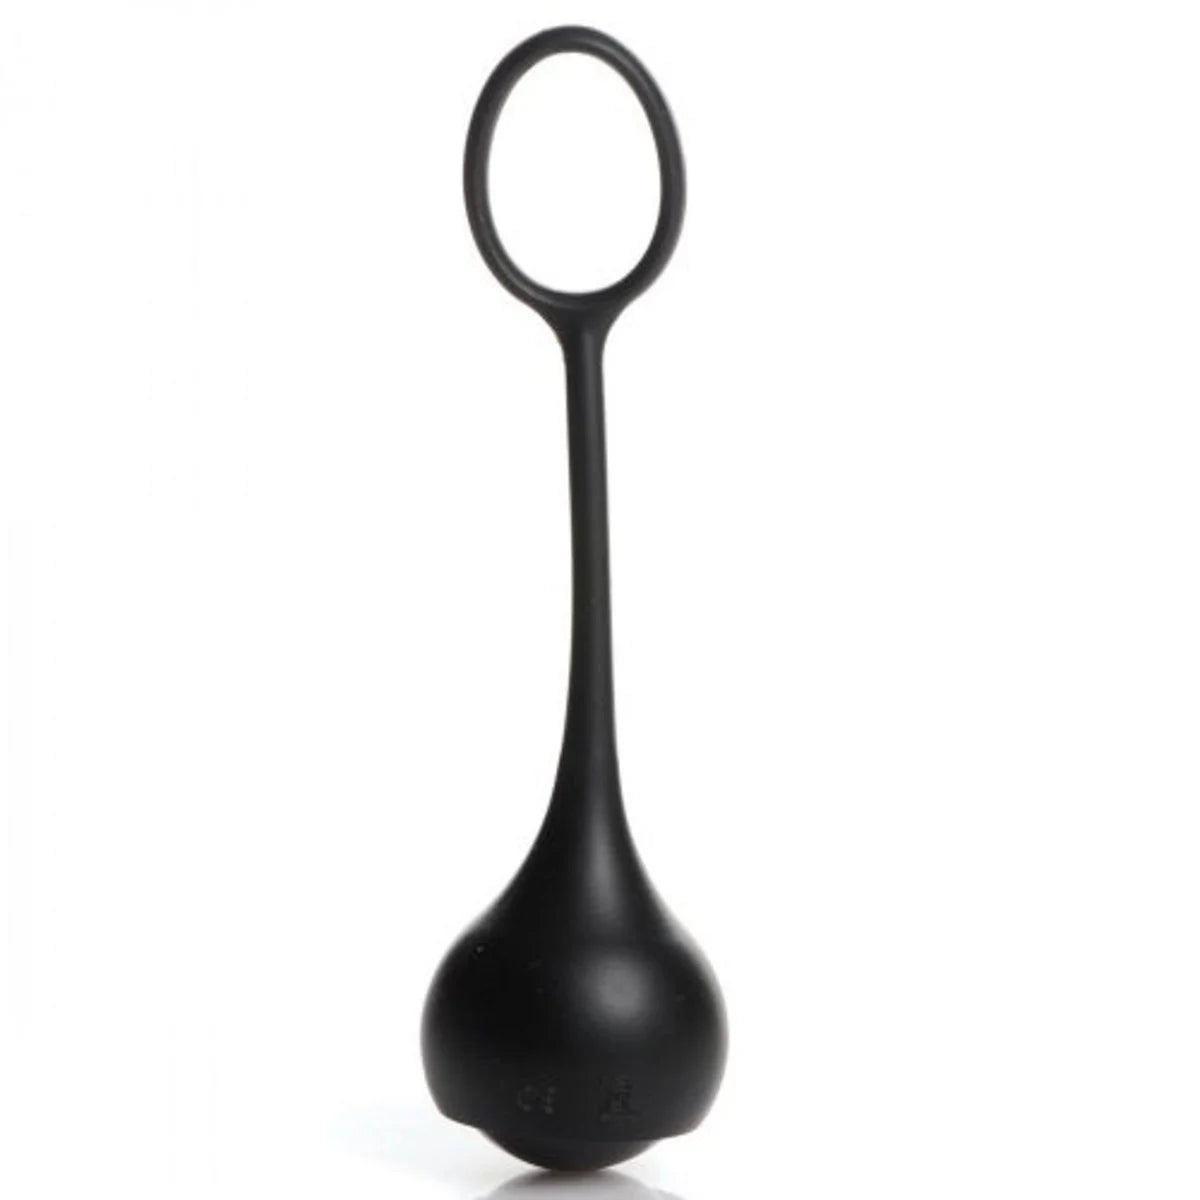 Master Series Cock Dangler Silicone Penis Strap with Weights Black